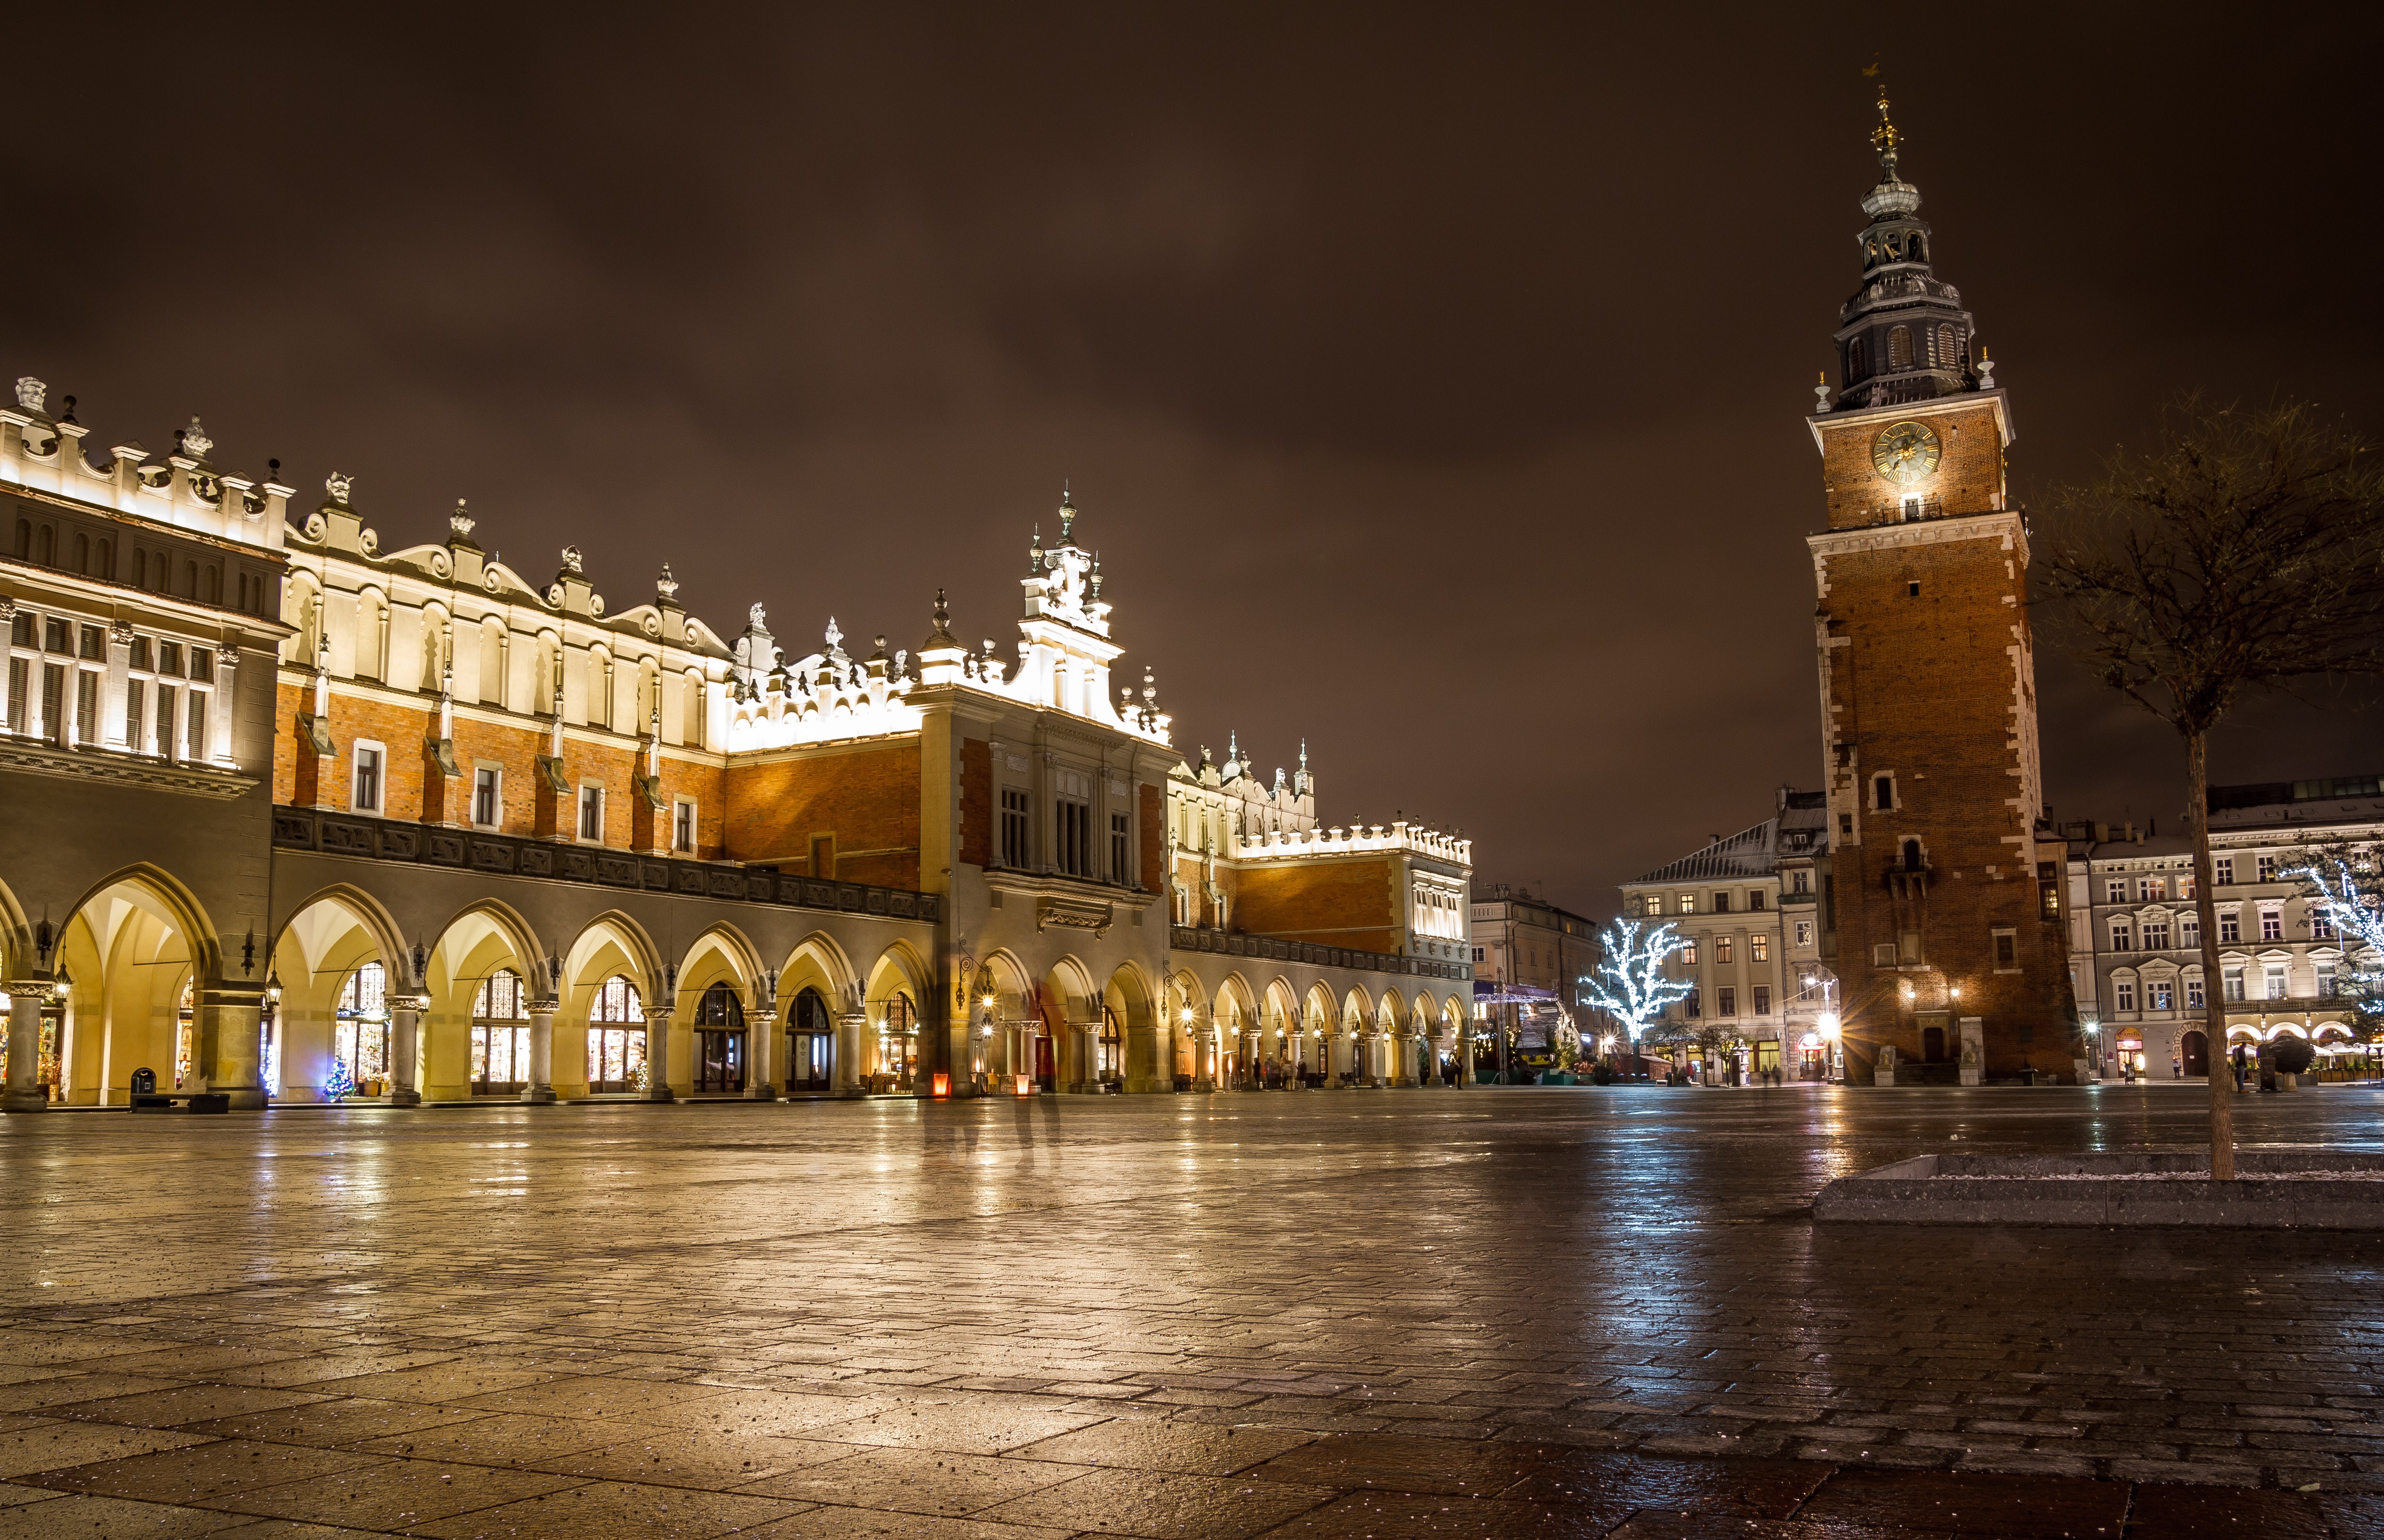 Town Hall Tower and Sukiennice, Krakow, Poland, Architecture, Outdoor, Water, Travel, HQ Photo